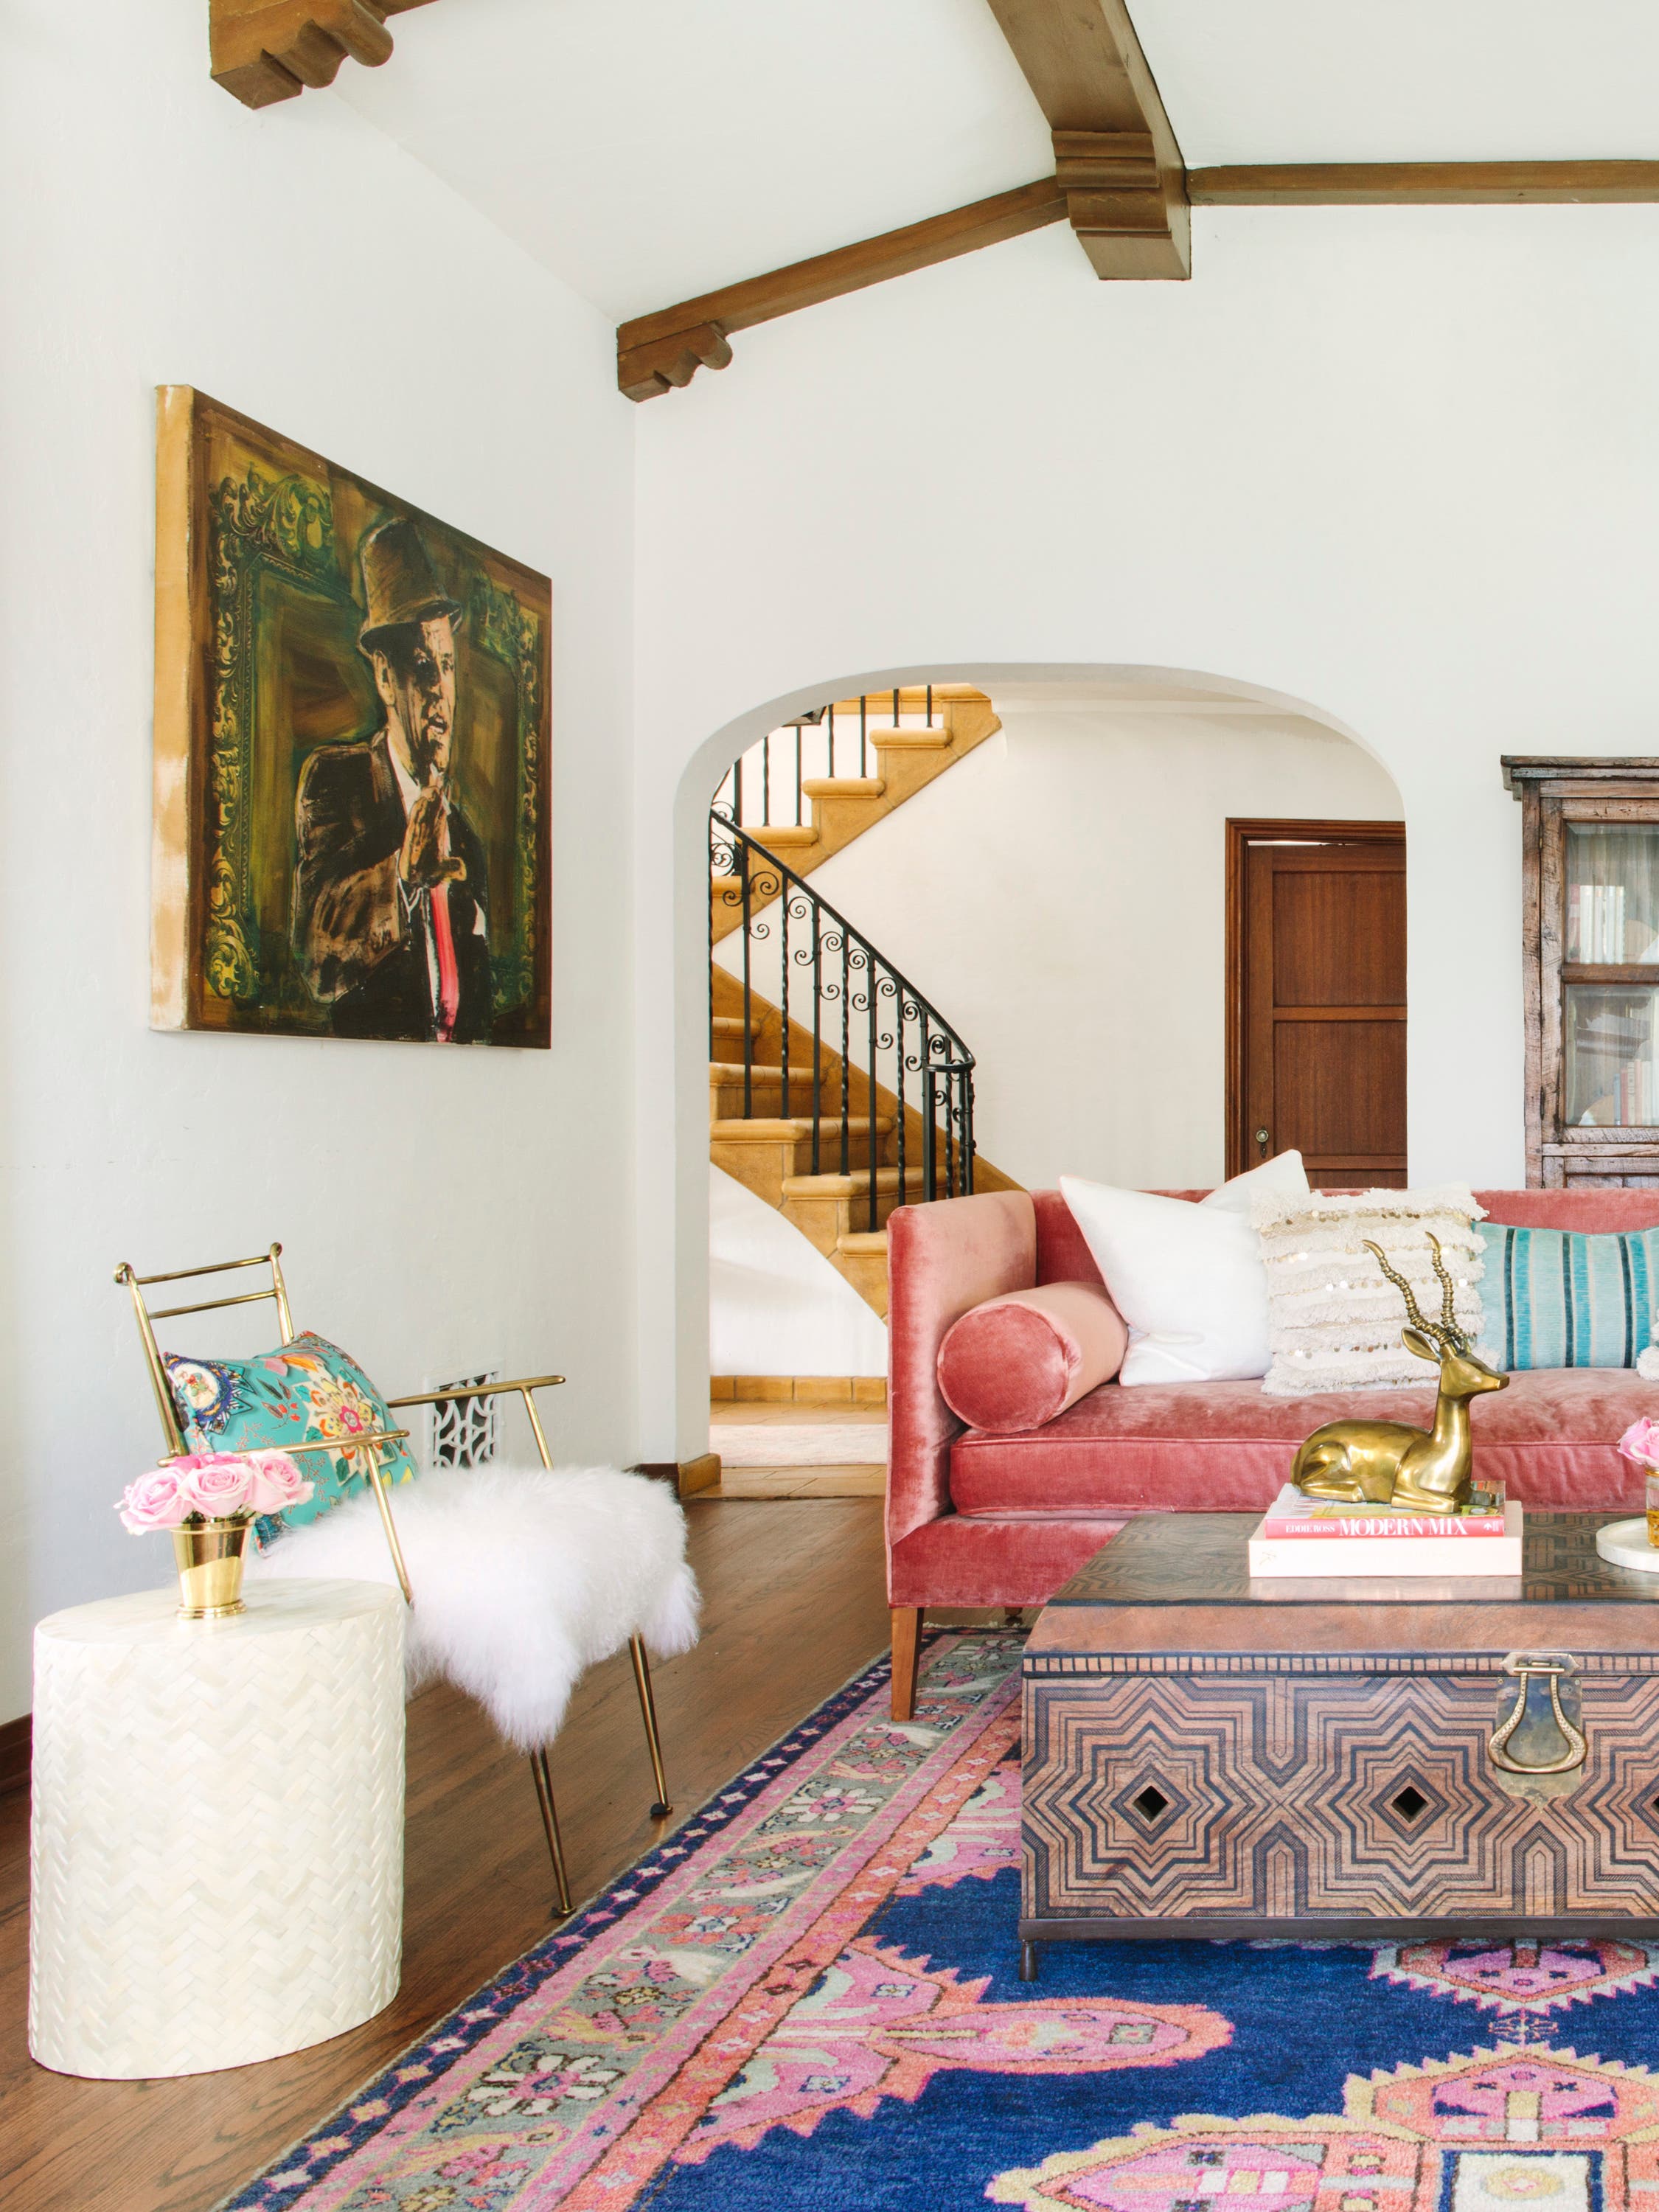 Spain Meets California in This Colorful LA Home